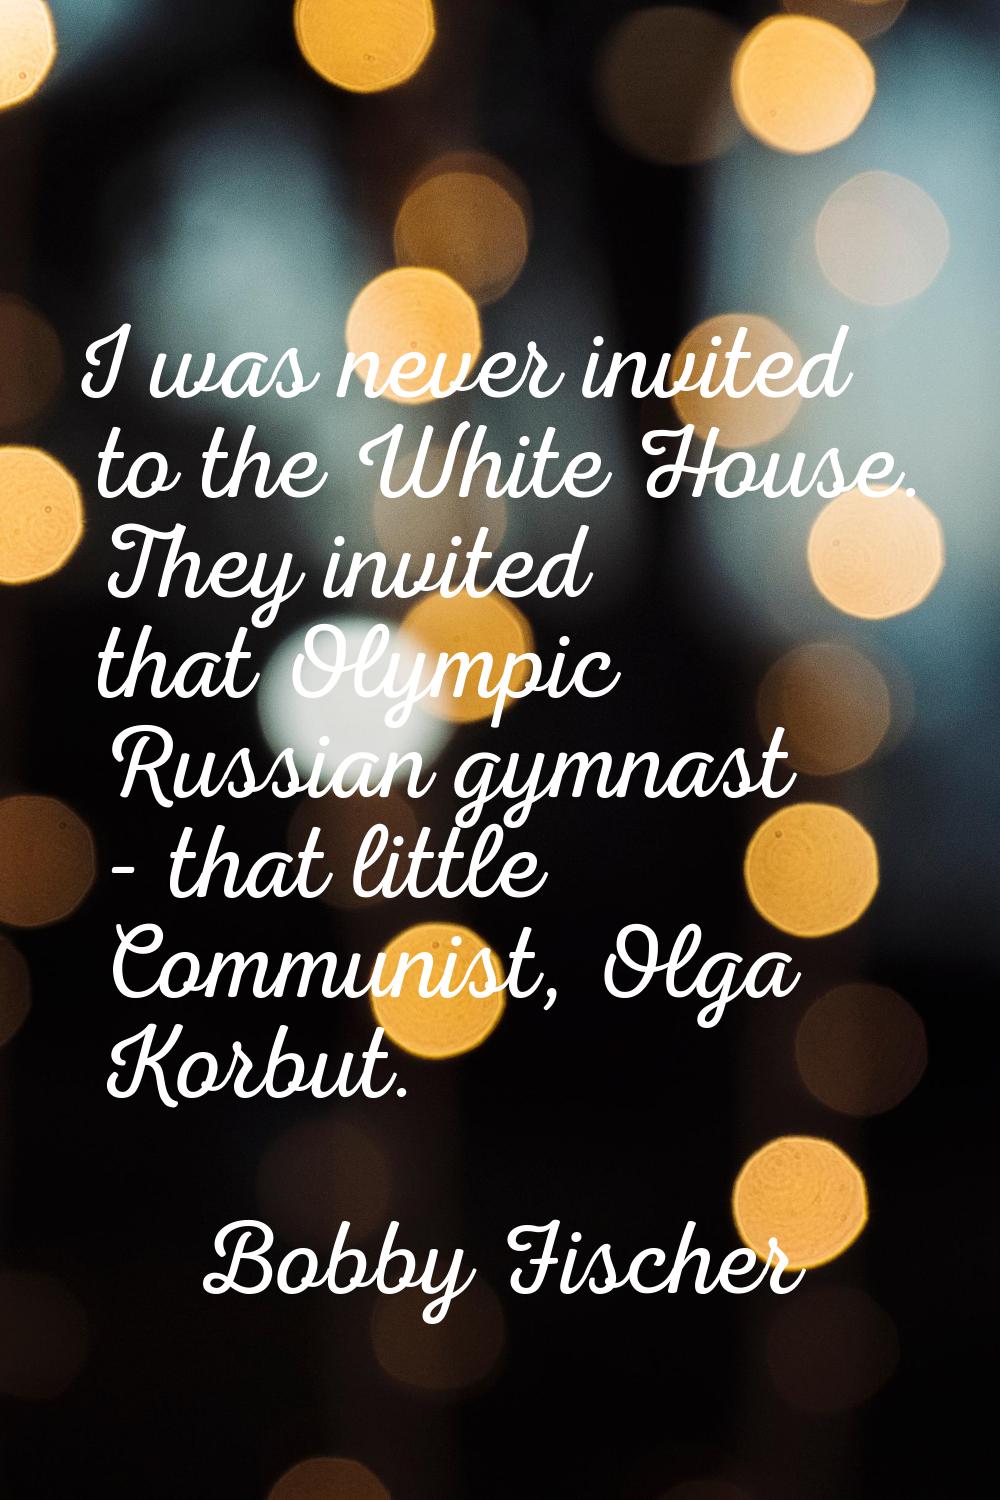 I was never invited to the White House. They invited that Olympic Russian gymnast - that little Com